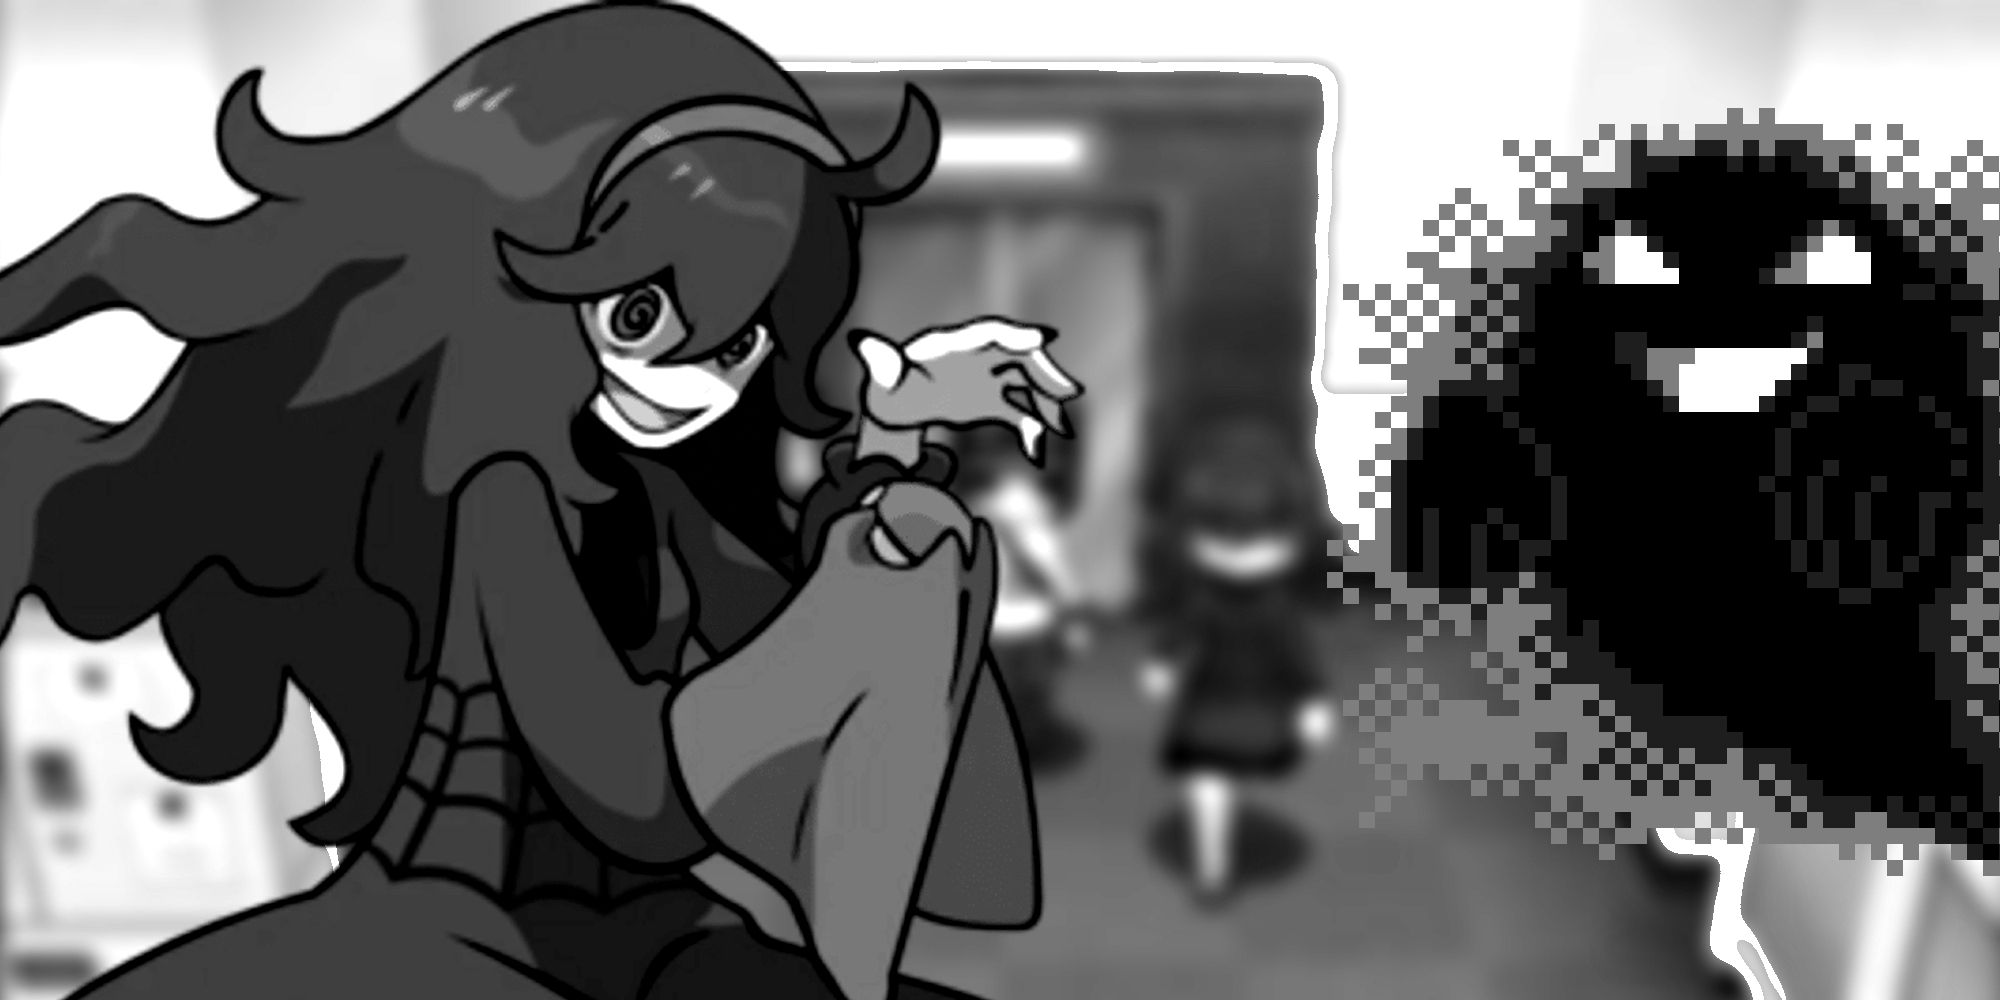 The Lumiose Ghost Girl appearing in the background with the Hex Maniac and original ghost sprite of Pokemon appearing in the foreground.